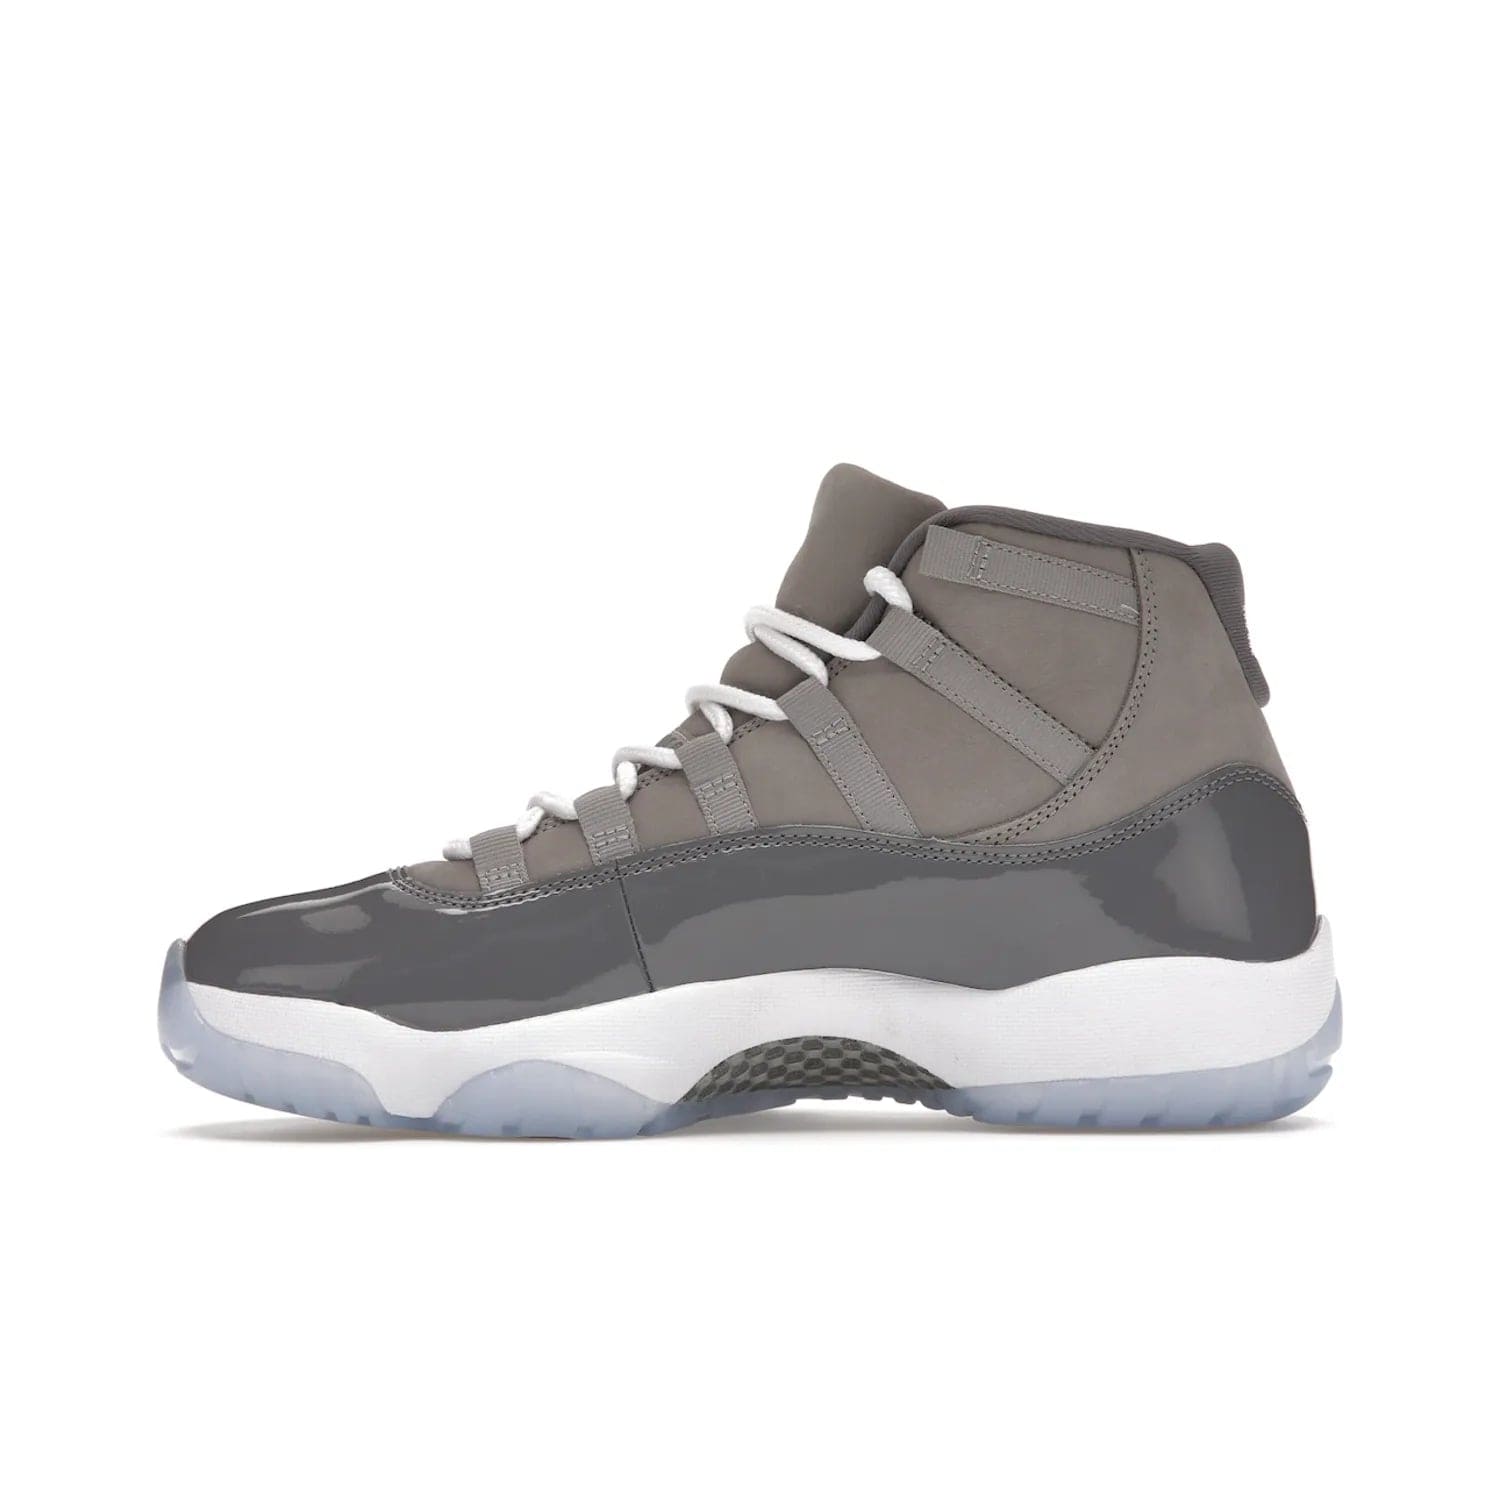 Jordan 11 Retro Cool Grey (2021) - Image 19 - Only at www.BallersClubKickz.com - Shop the Air Jordan 11 Retro Cool Grey (2021) for a must-have sneaker with a Cool Grey Durabuck upper, patent leather overlays, signature Jumpman embroidery, a white midsole, icy blue translucent outsole, and Multi-Color accents.  Released in December 2021 for $225.